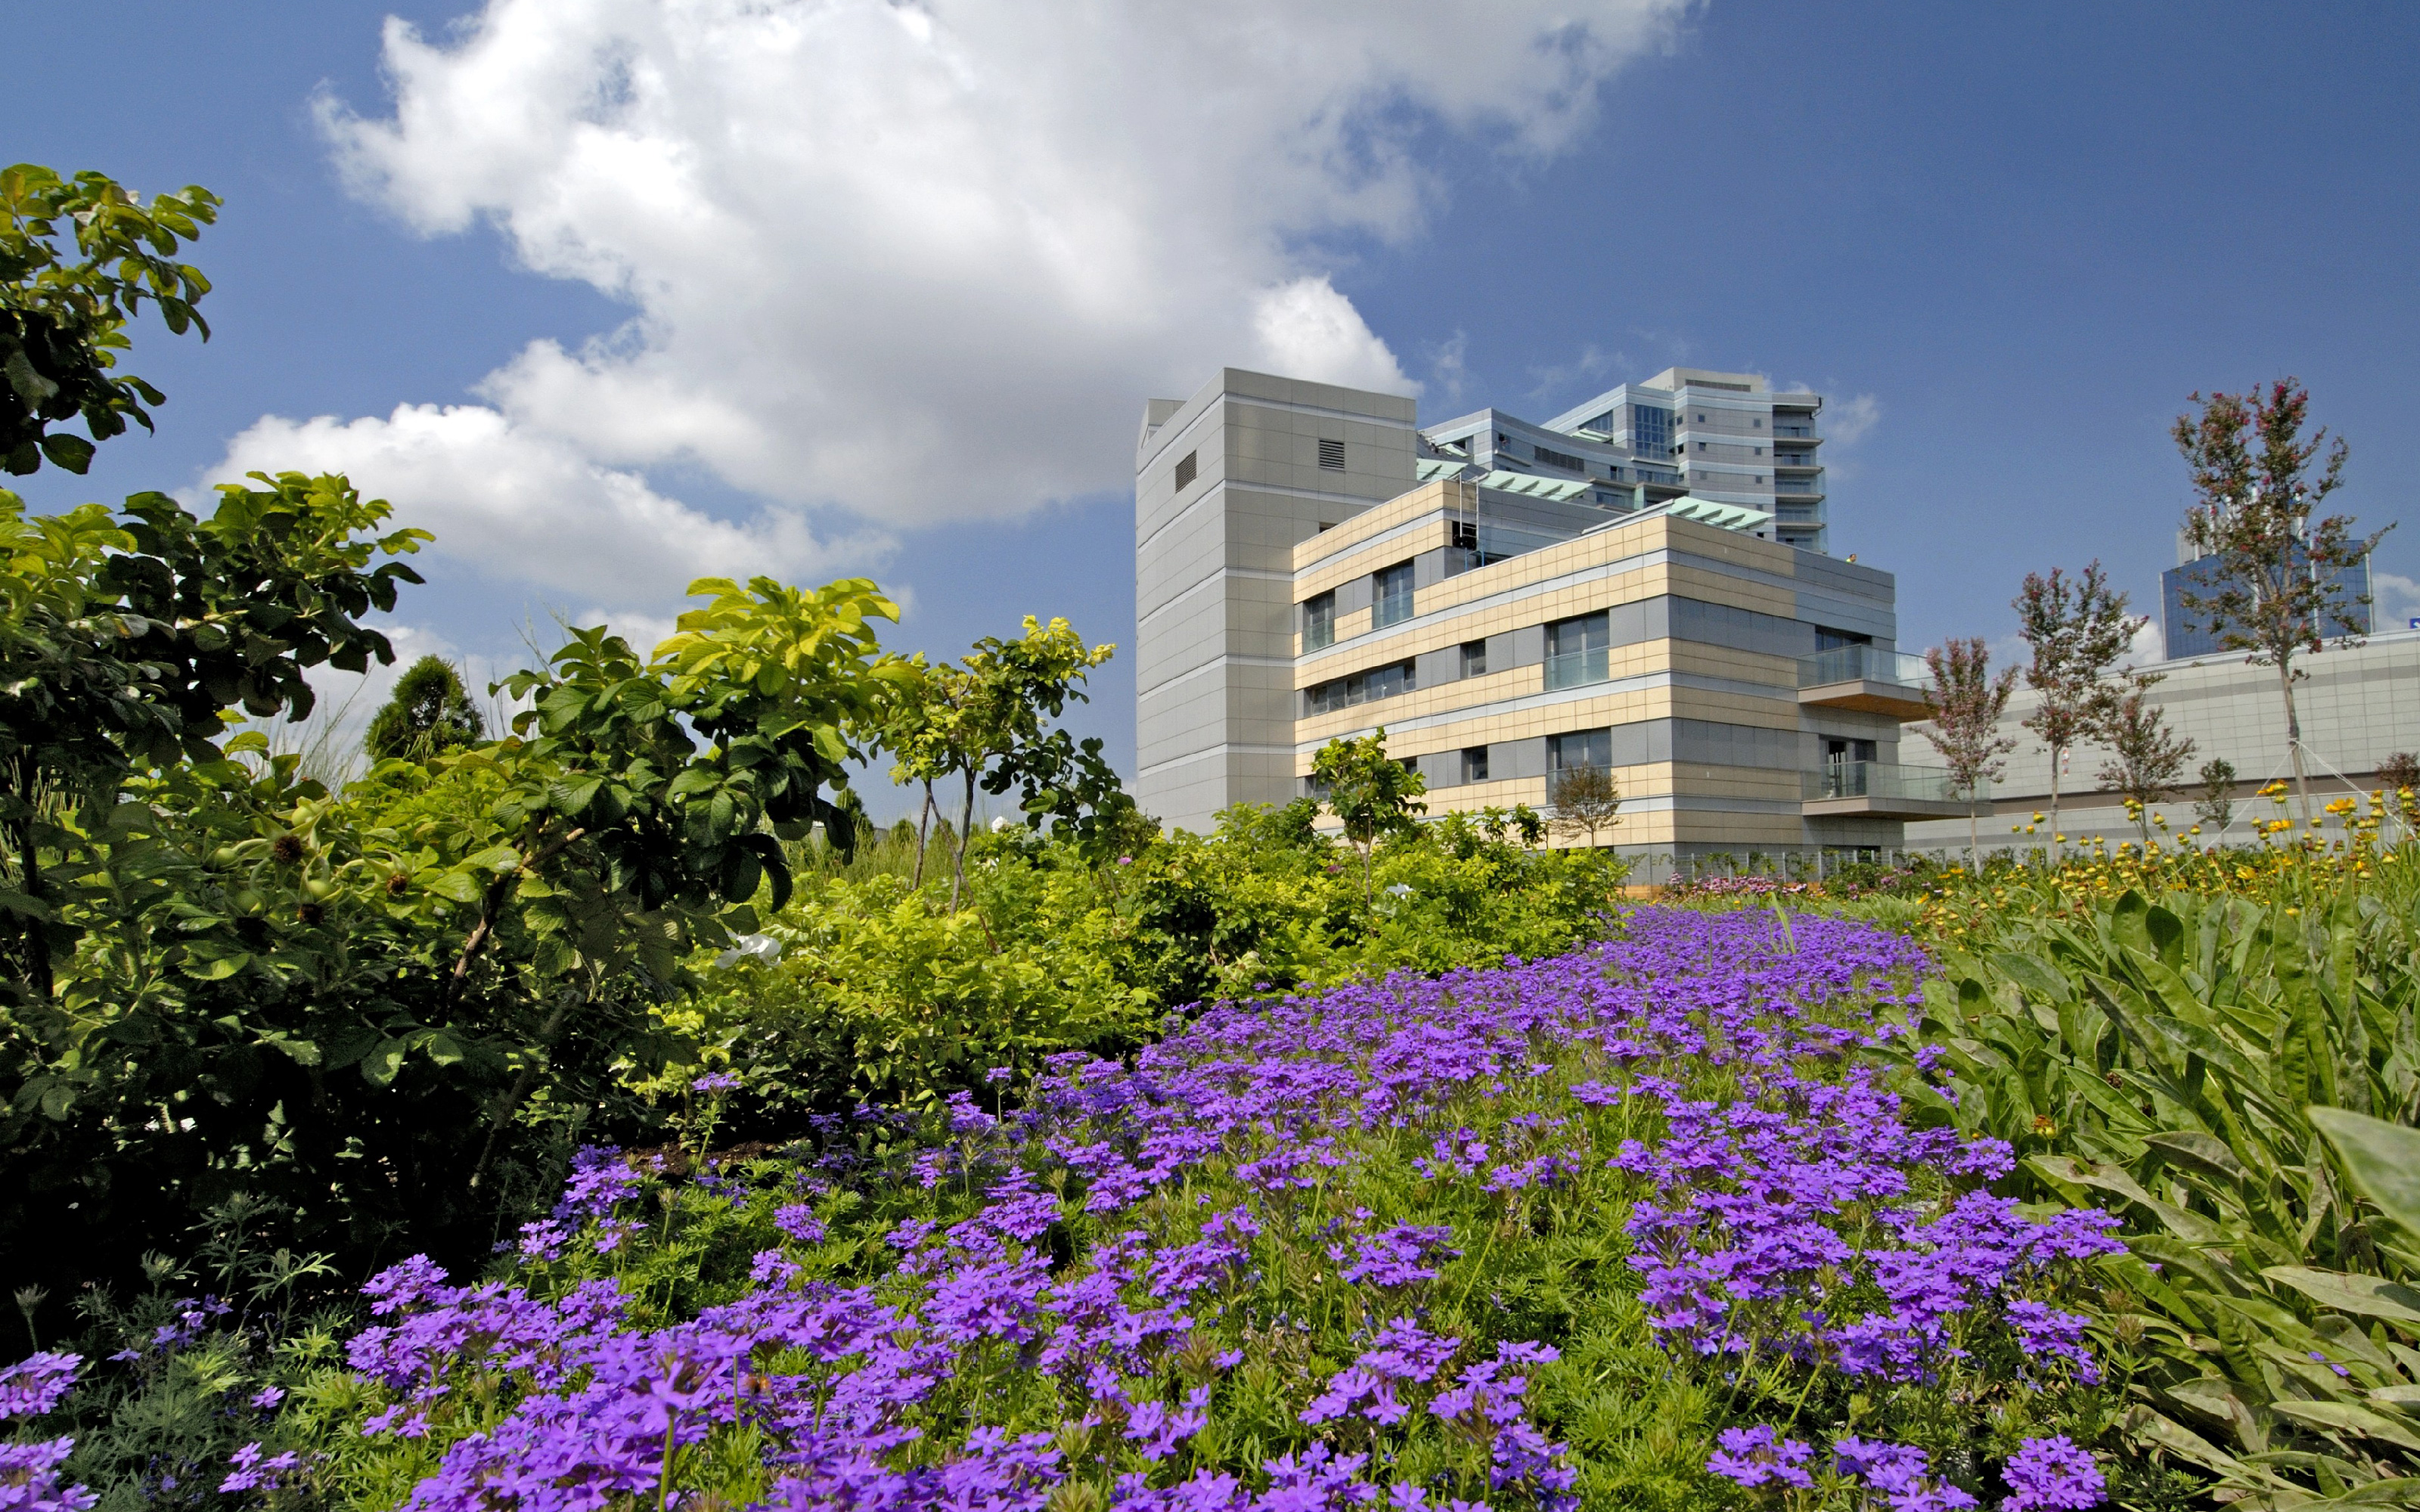 Roof garden with purple flowers, bushes and trees